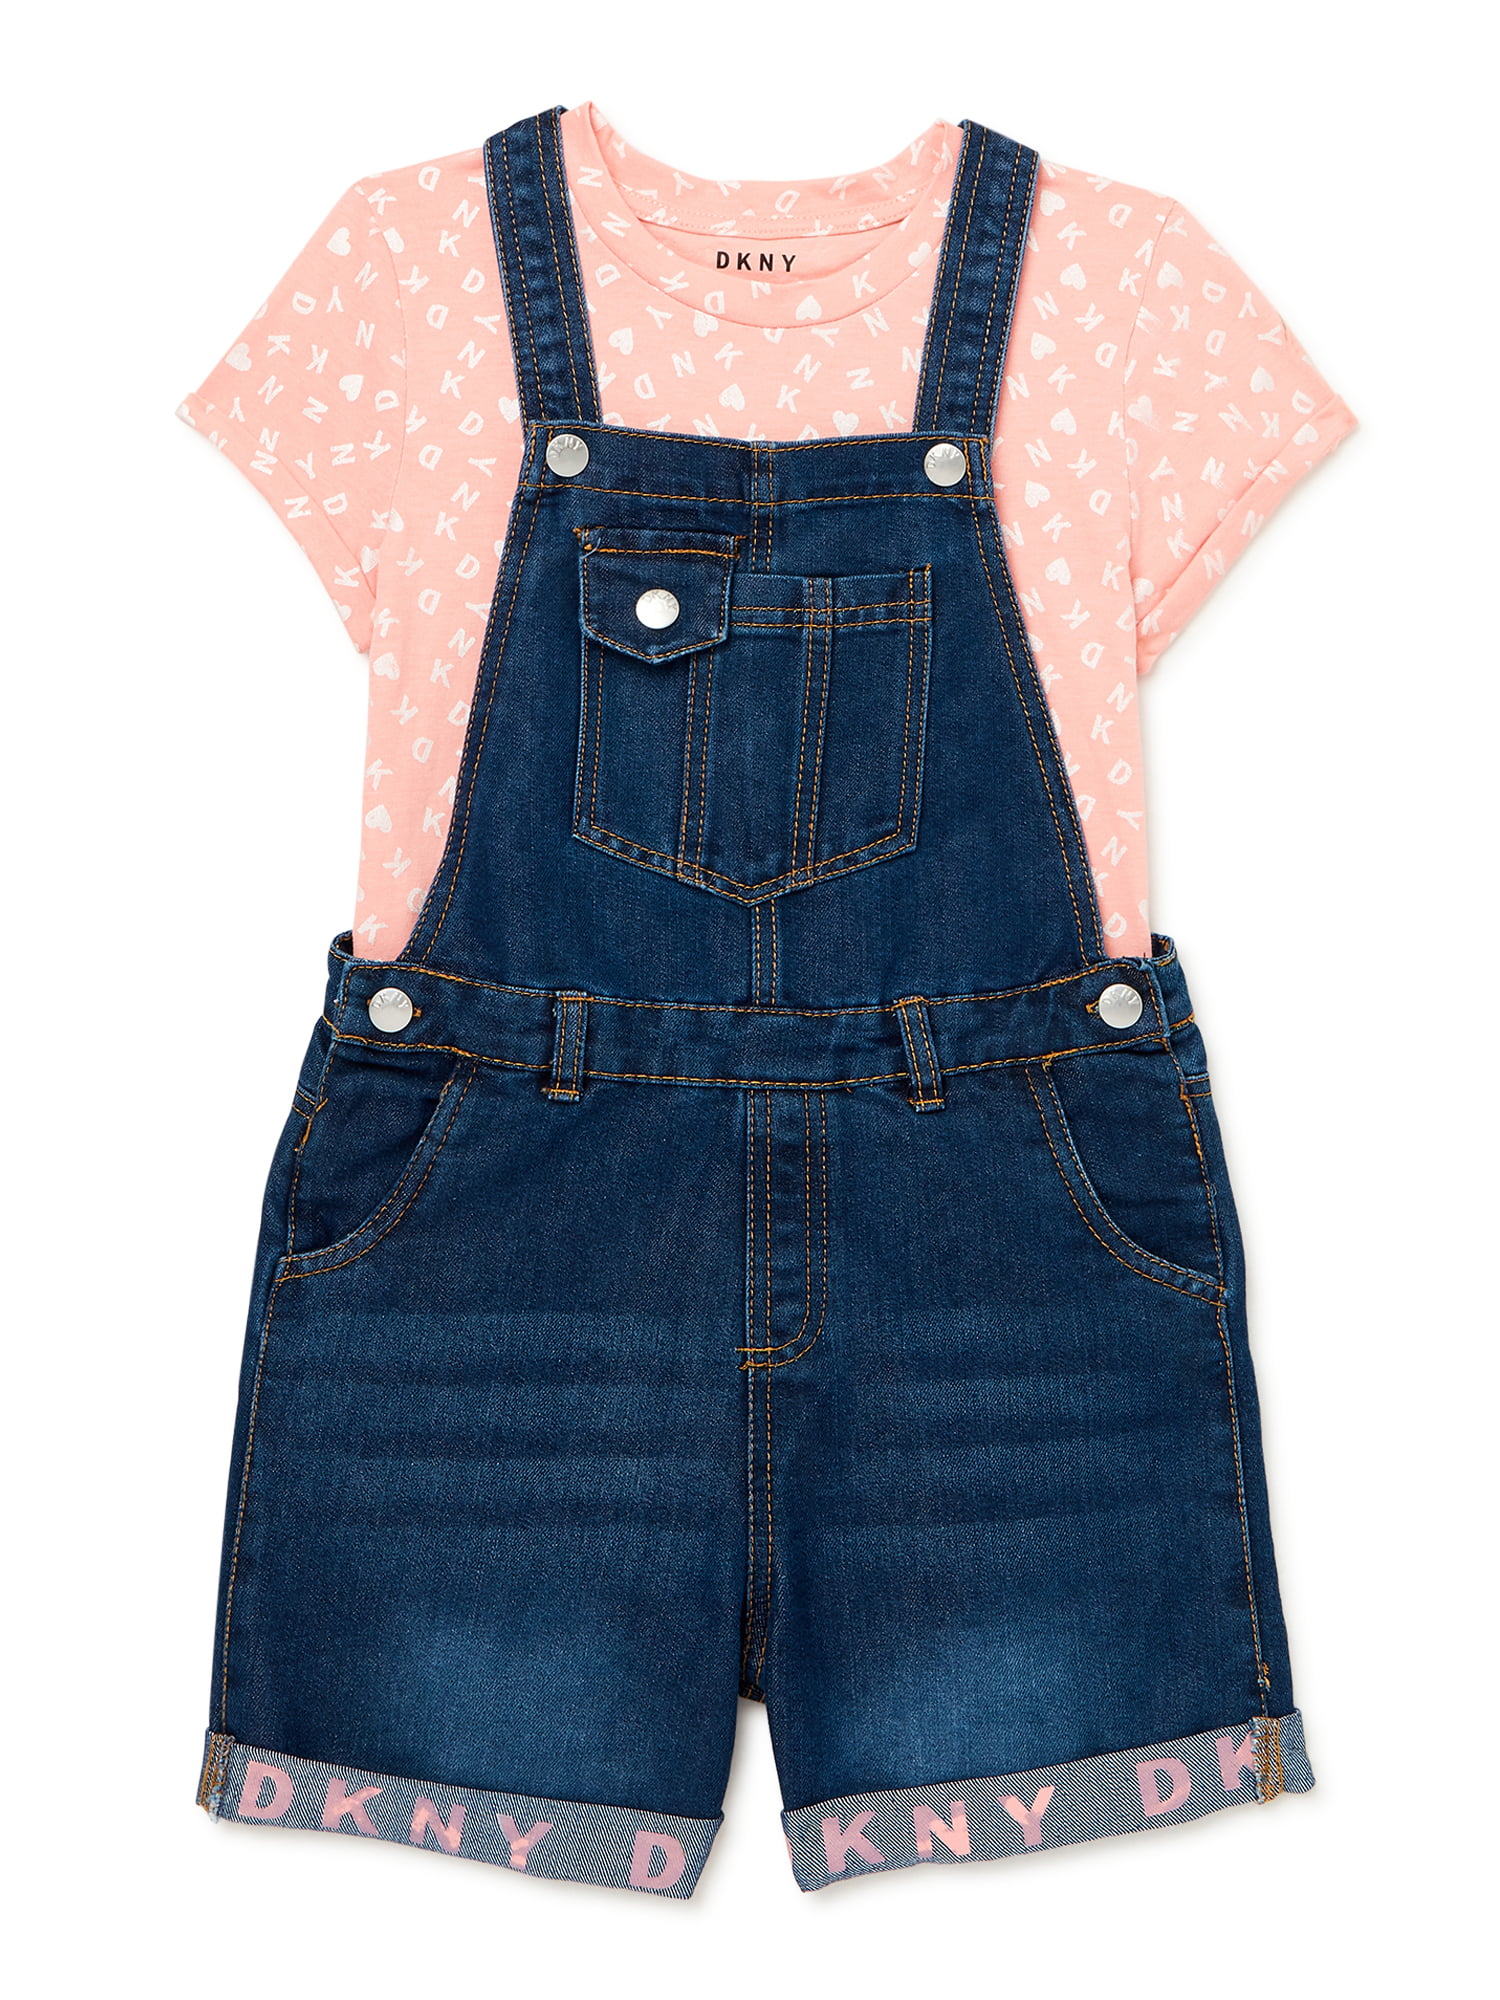 Stretch Denim Cuffed Jeans Overalls with Adjustable Straps DKNY Girls’ Overalls 